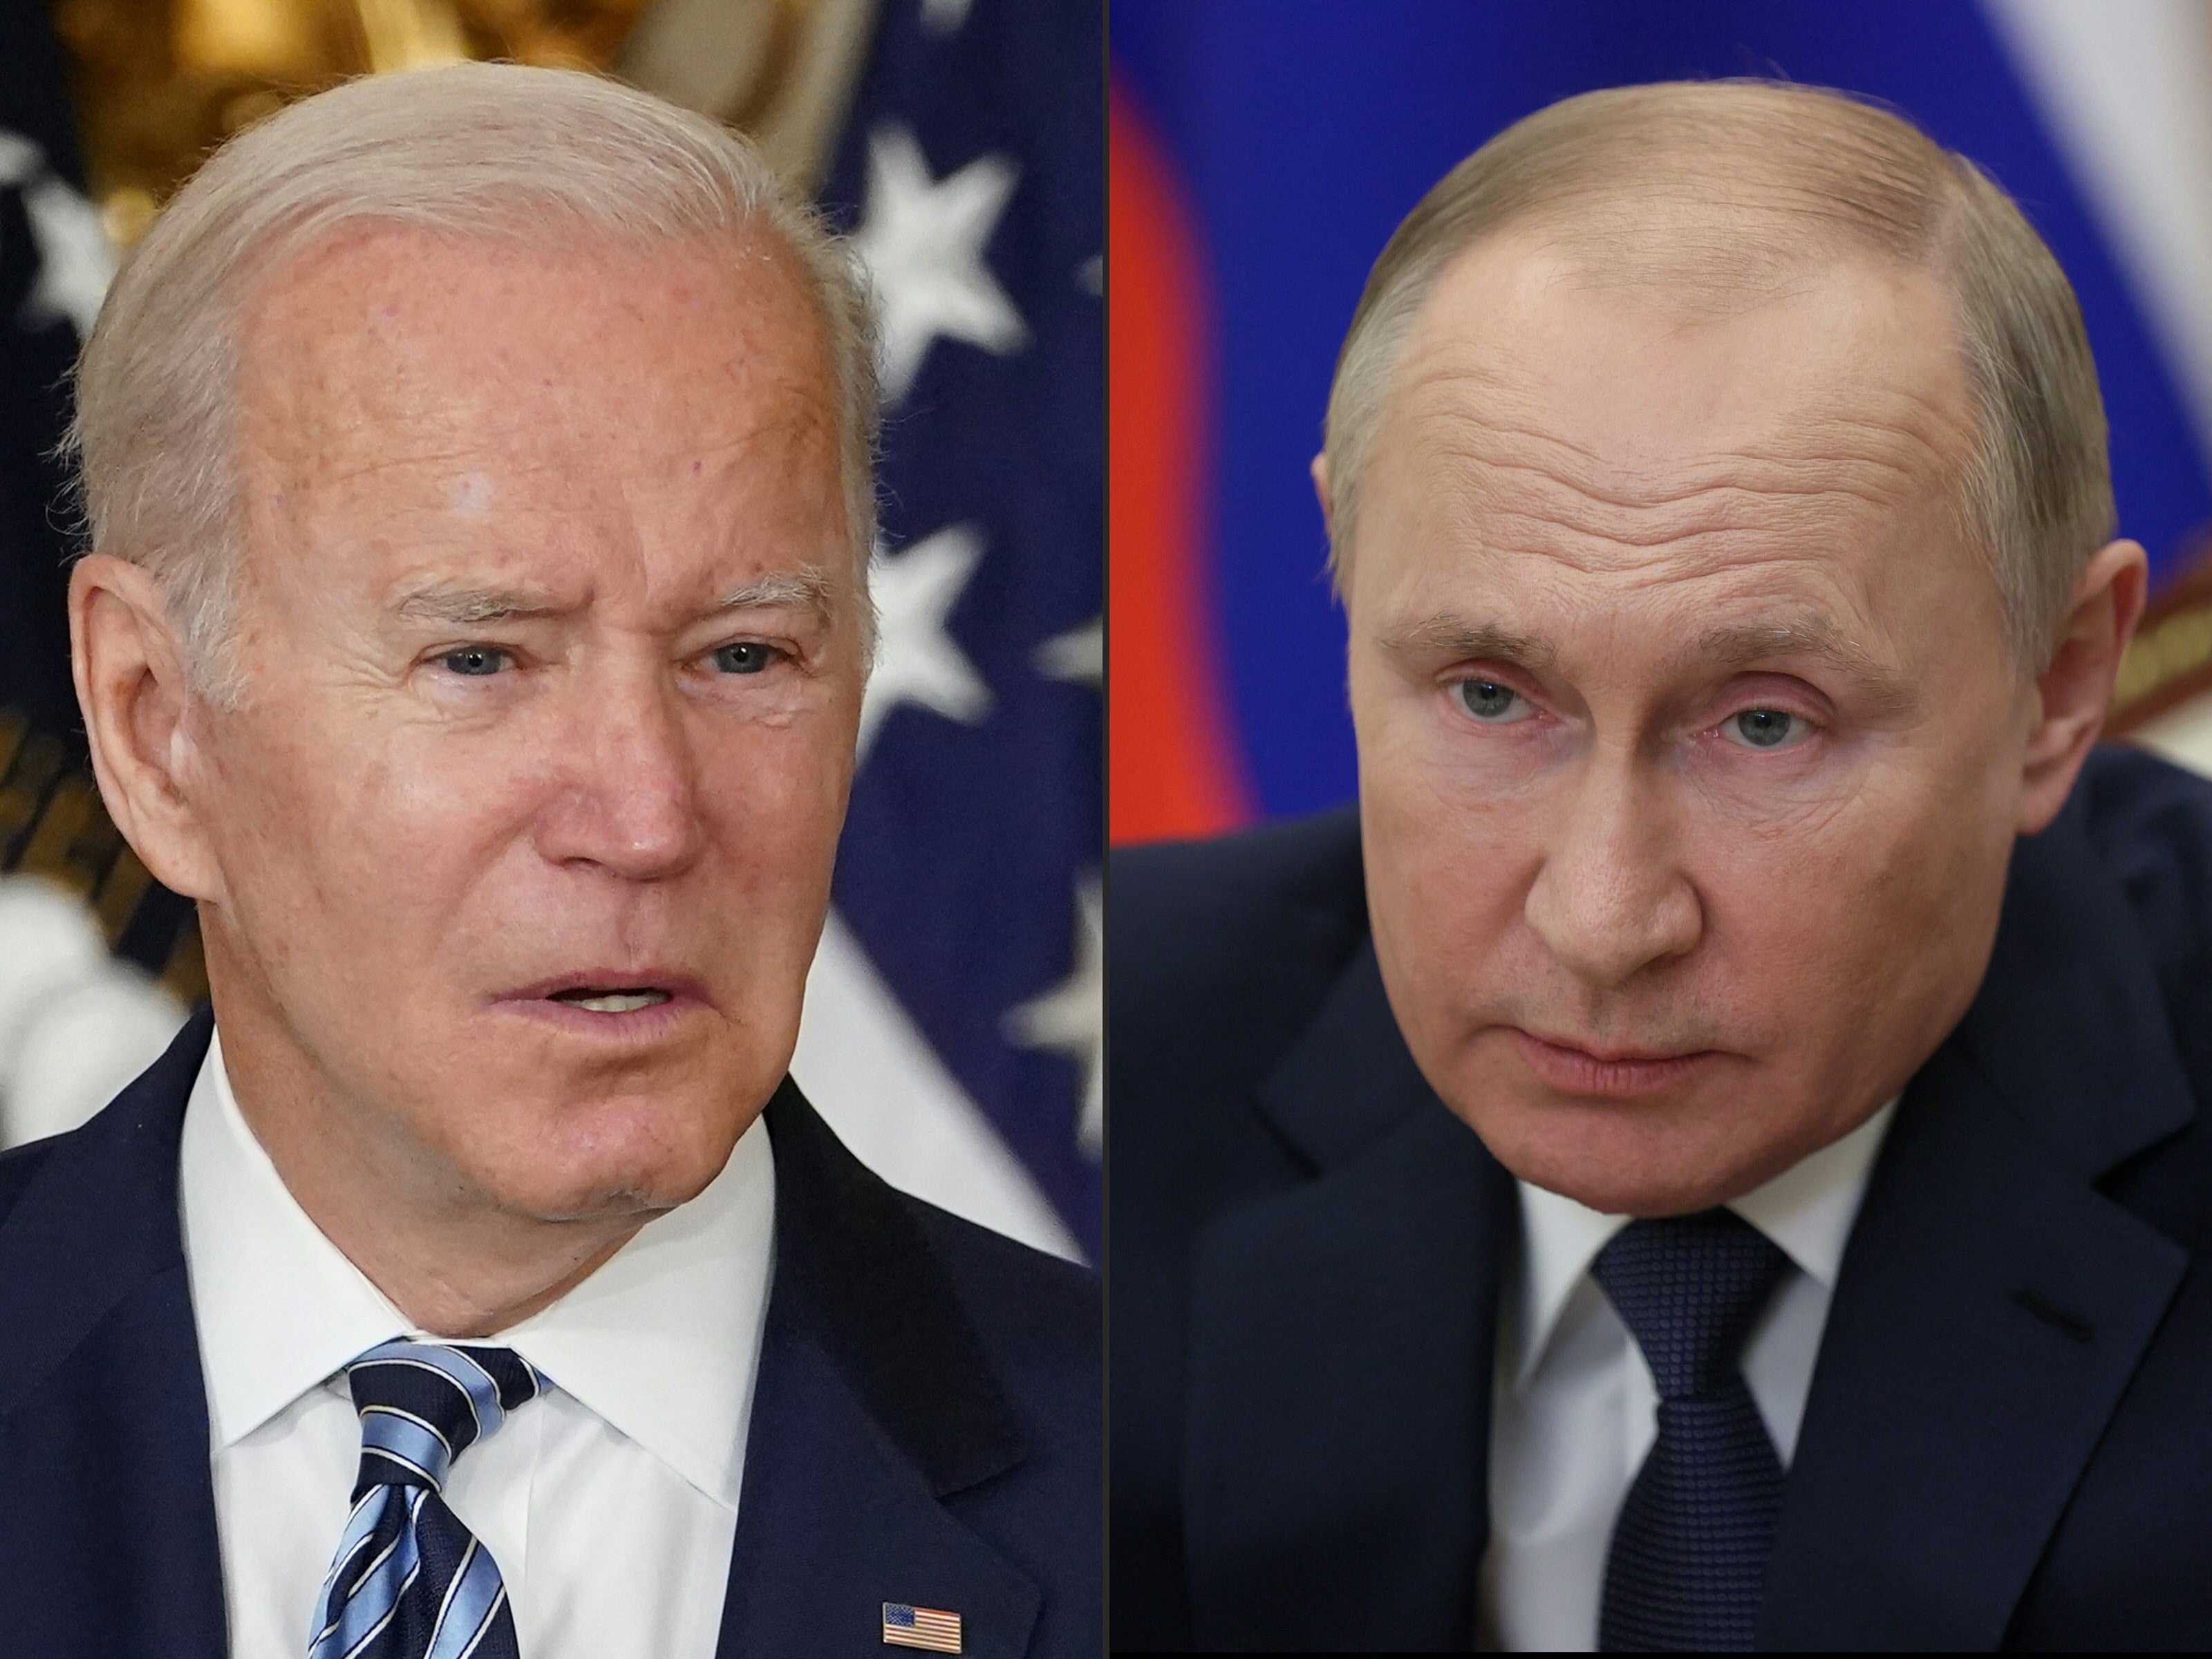 Biden and Putin will hold a call to deal with military tensions over Ukraine